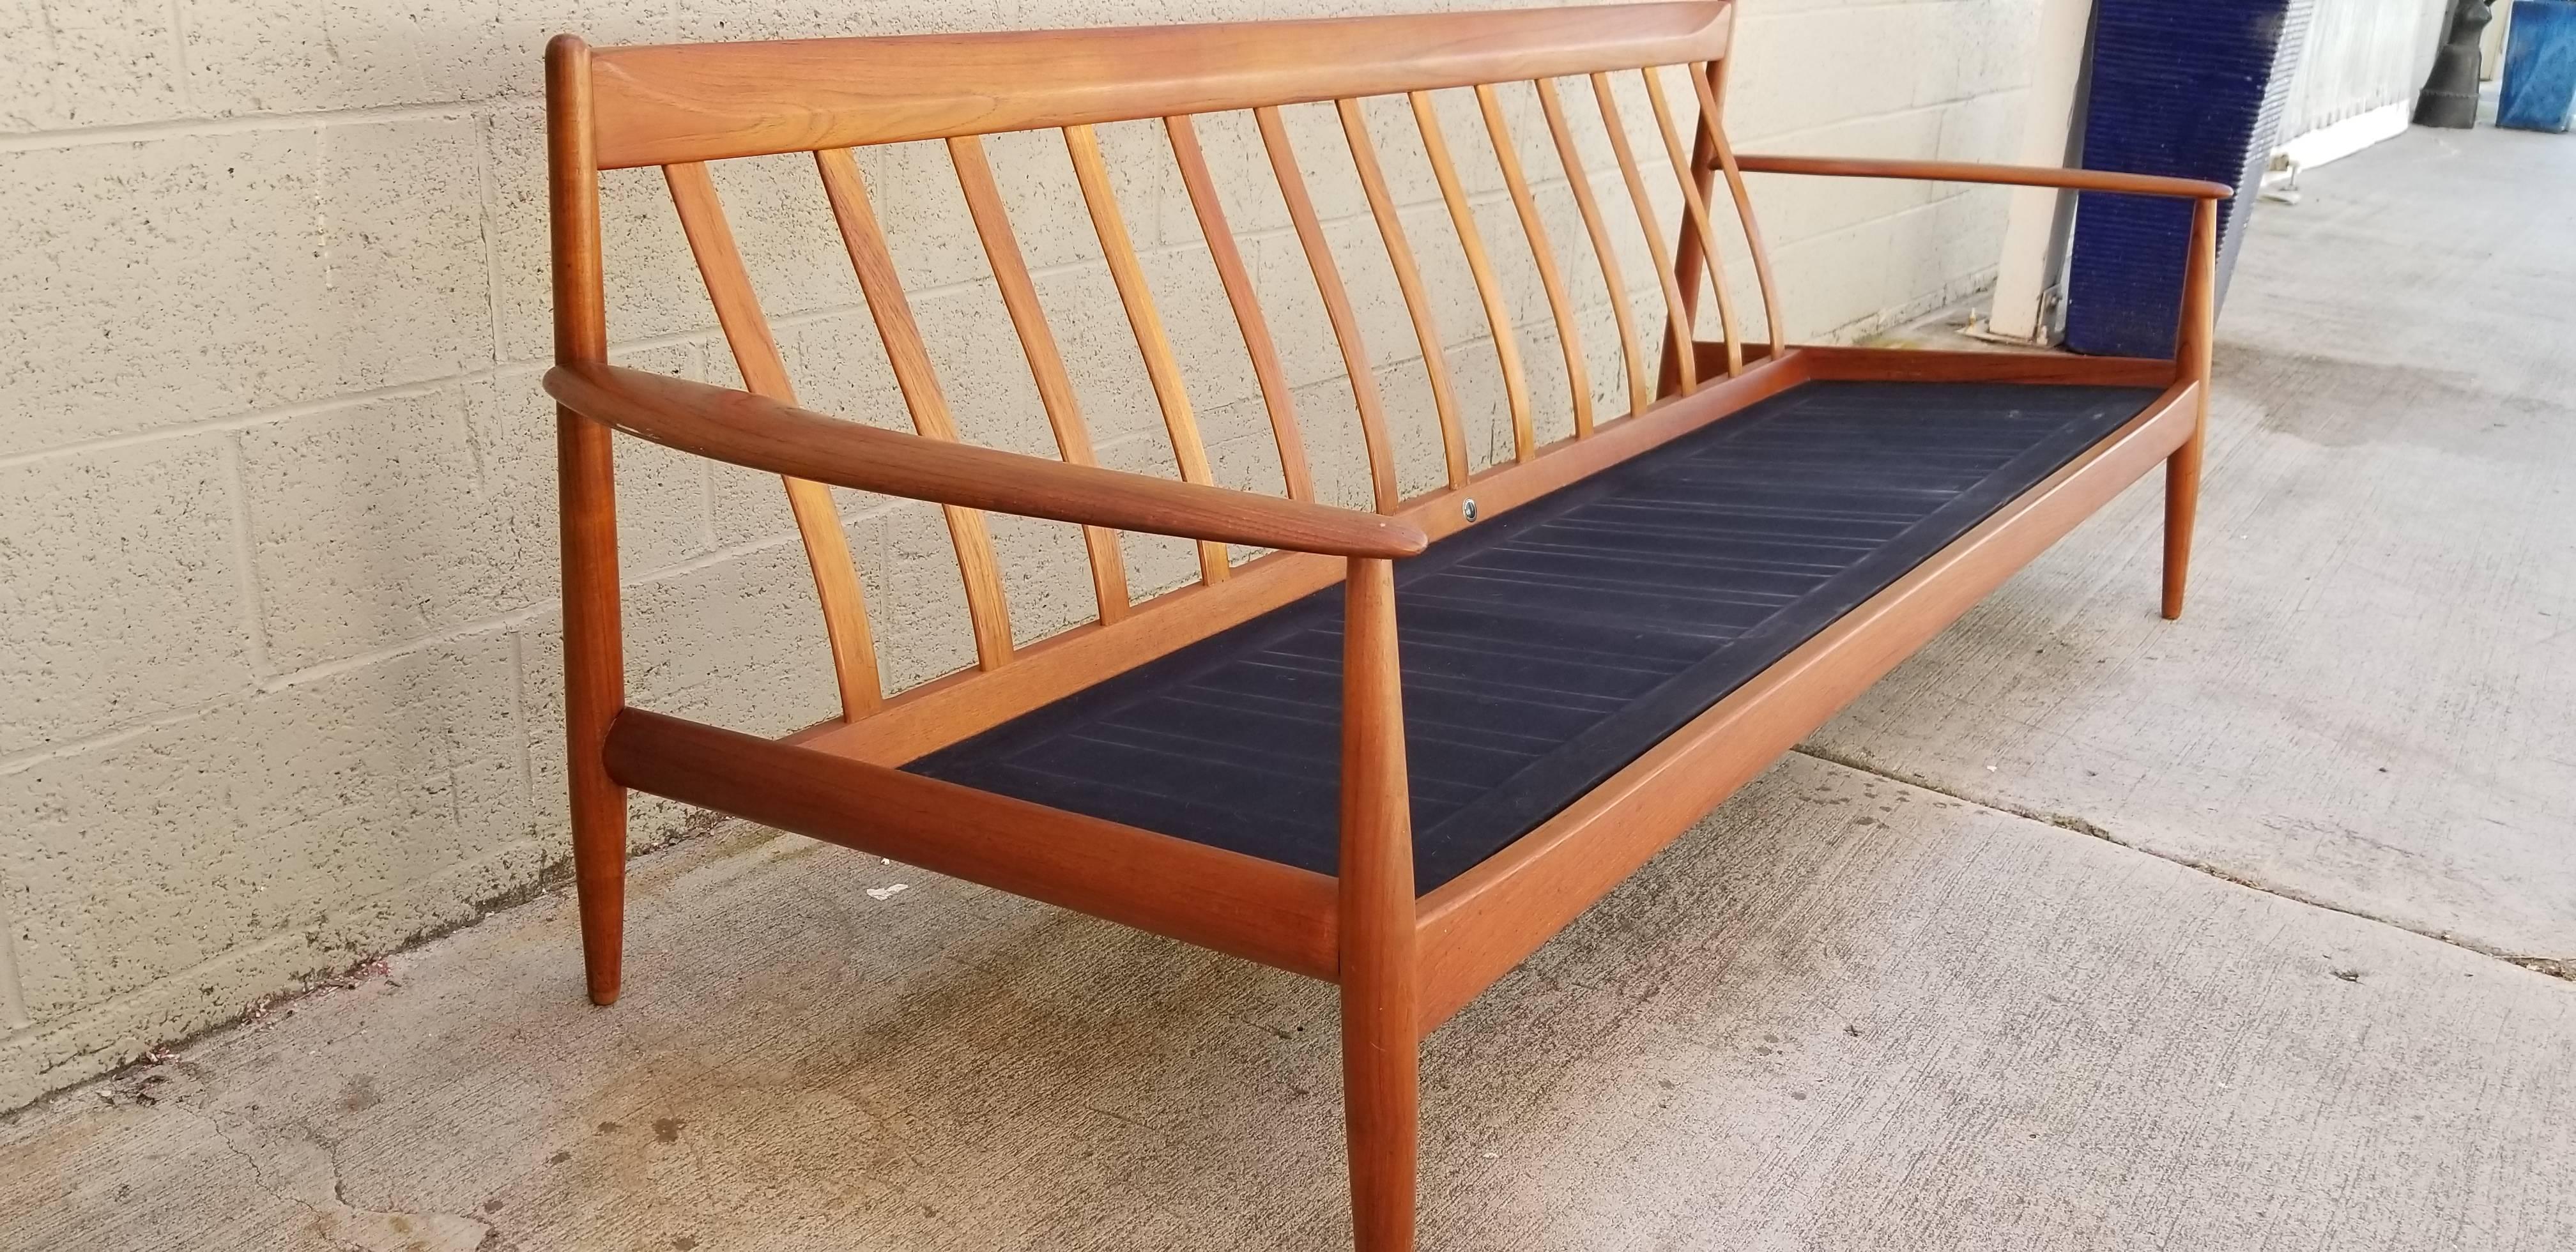 Teak Danish modern sofa designed by Grete Jalk for France & Daverkosen, Denmark, 1960s. Warm tone to teak frame. Clearly signed. In need of new upholstery. Original coil springs in good condition. Wear to dust cover fabric. Measure: Seat height 17